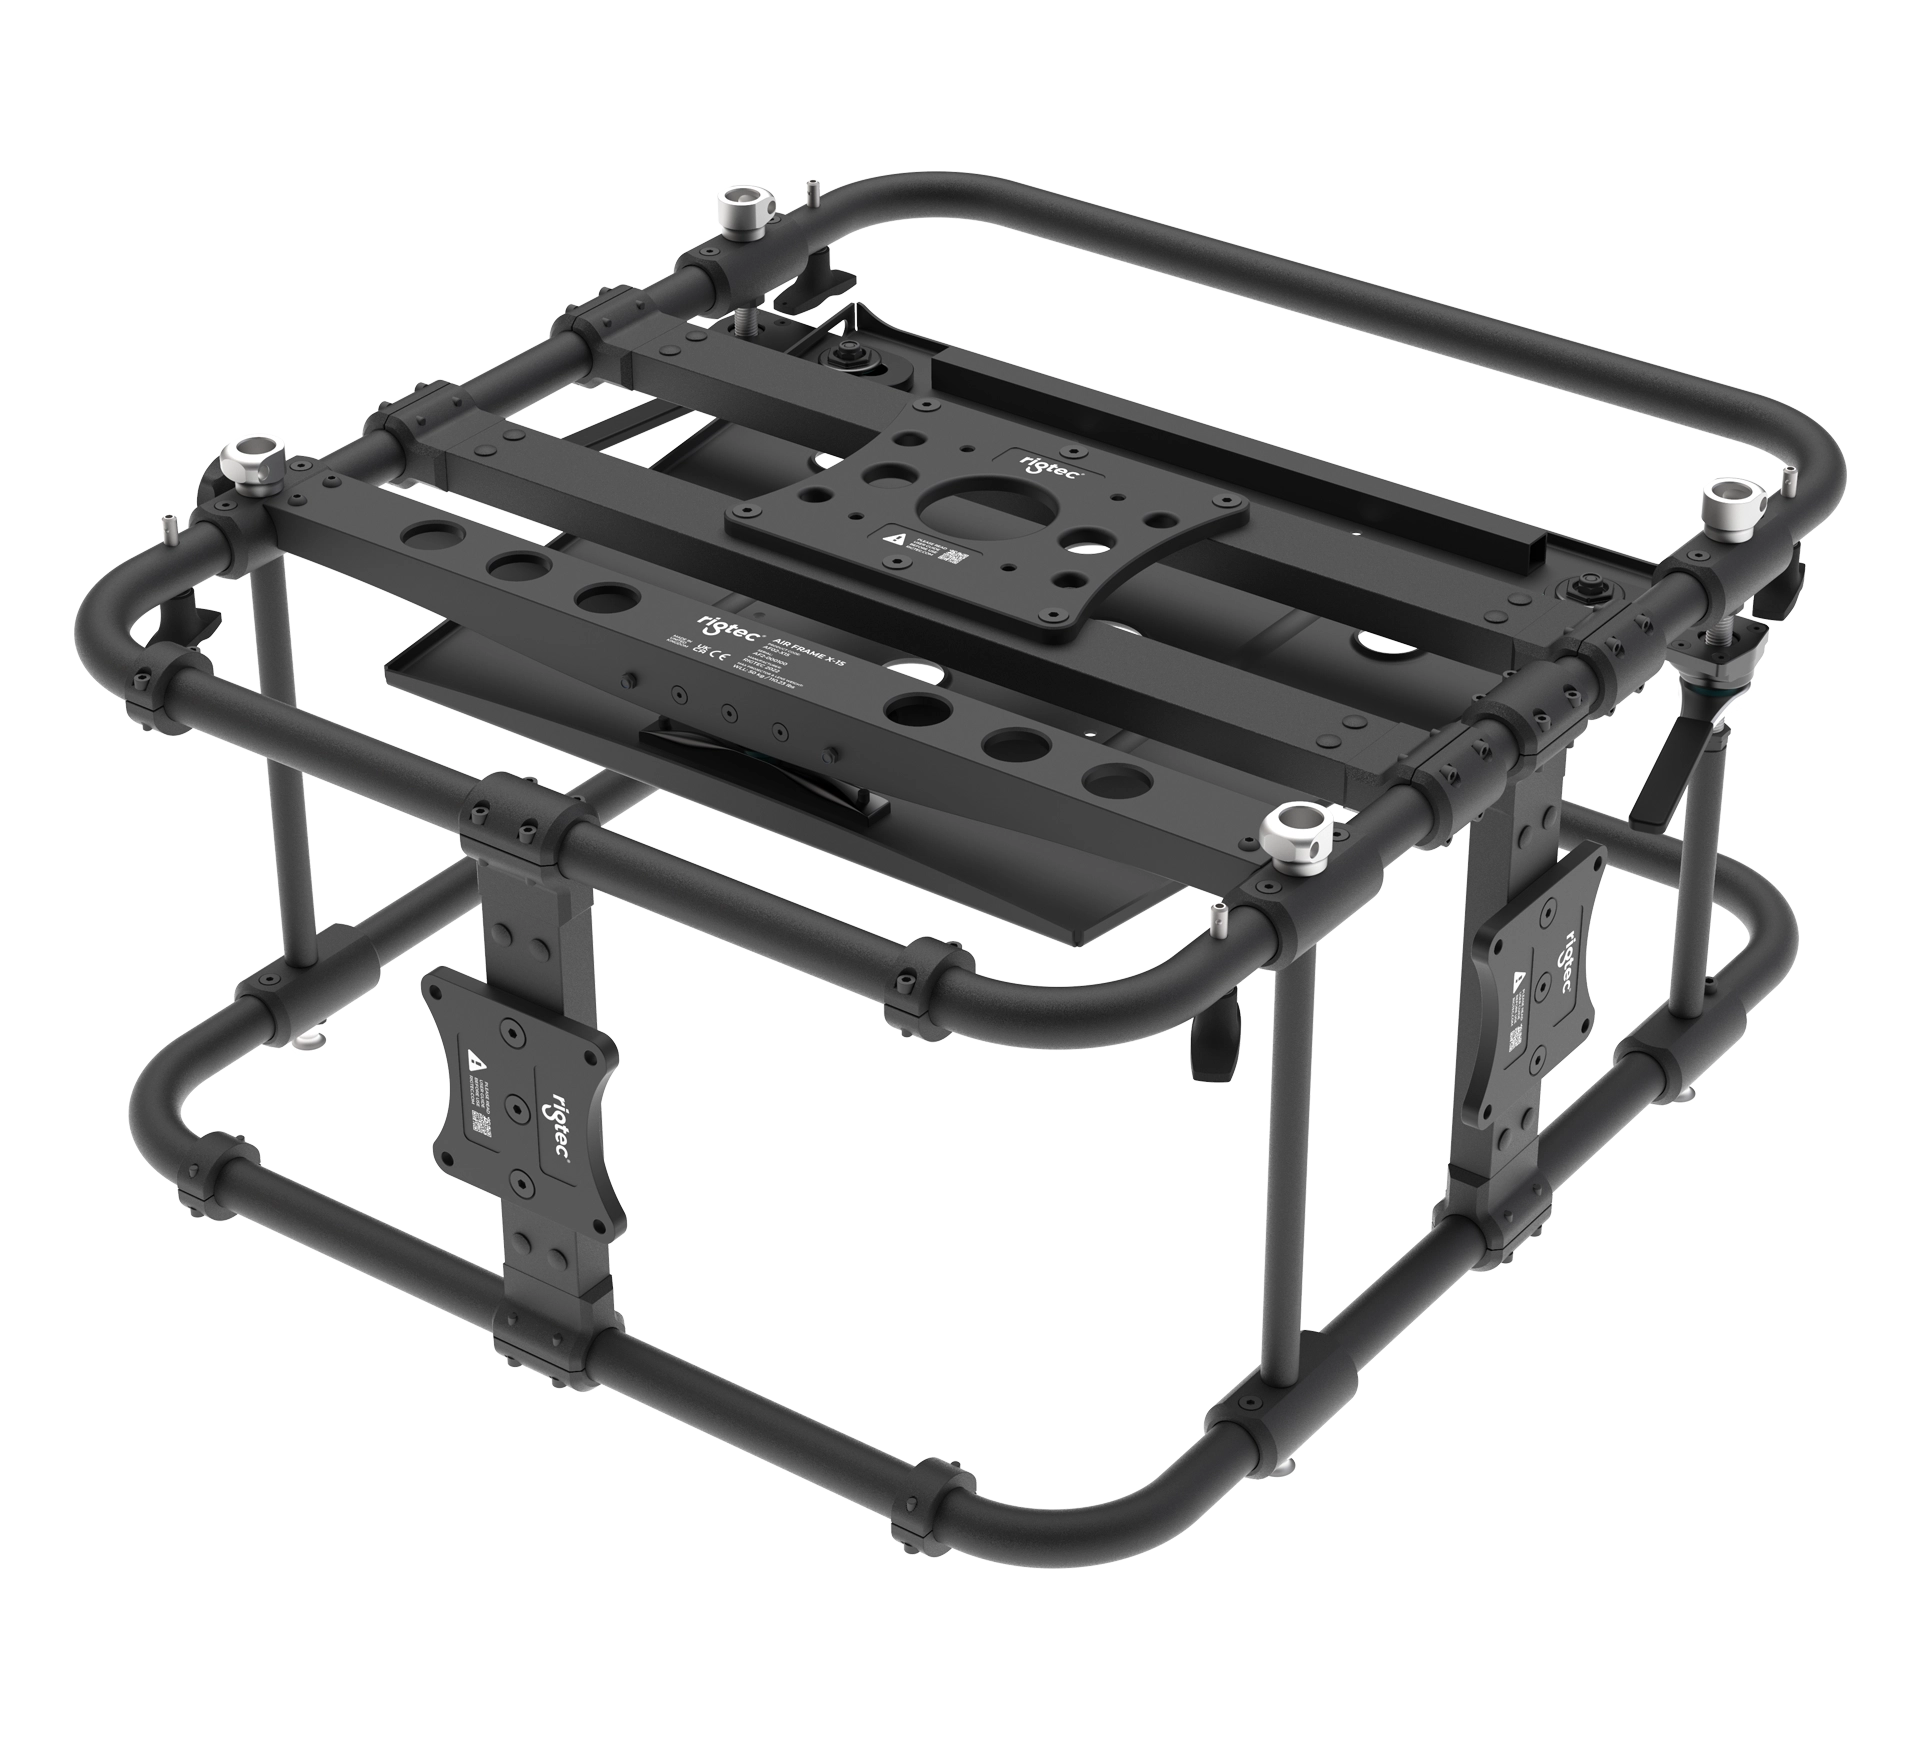 Rigtec Air Frame X15 Projector Rigging Frame back view to show all three Atom Grip mounting plates